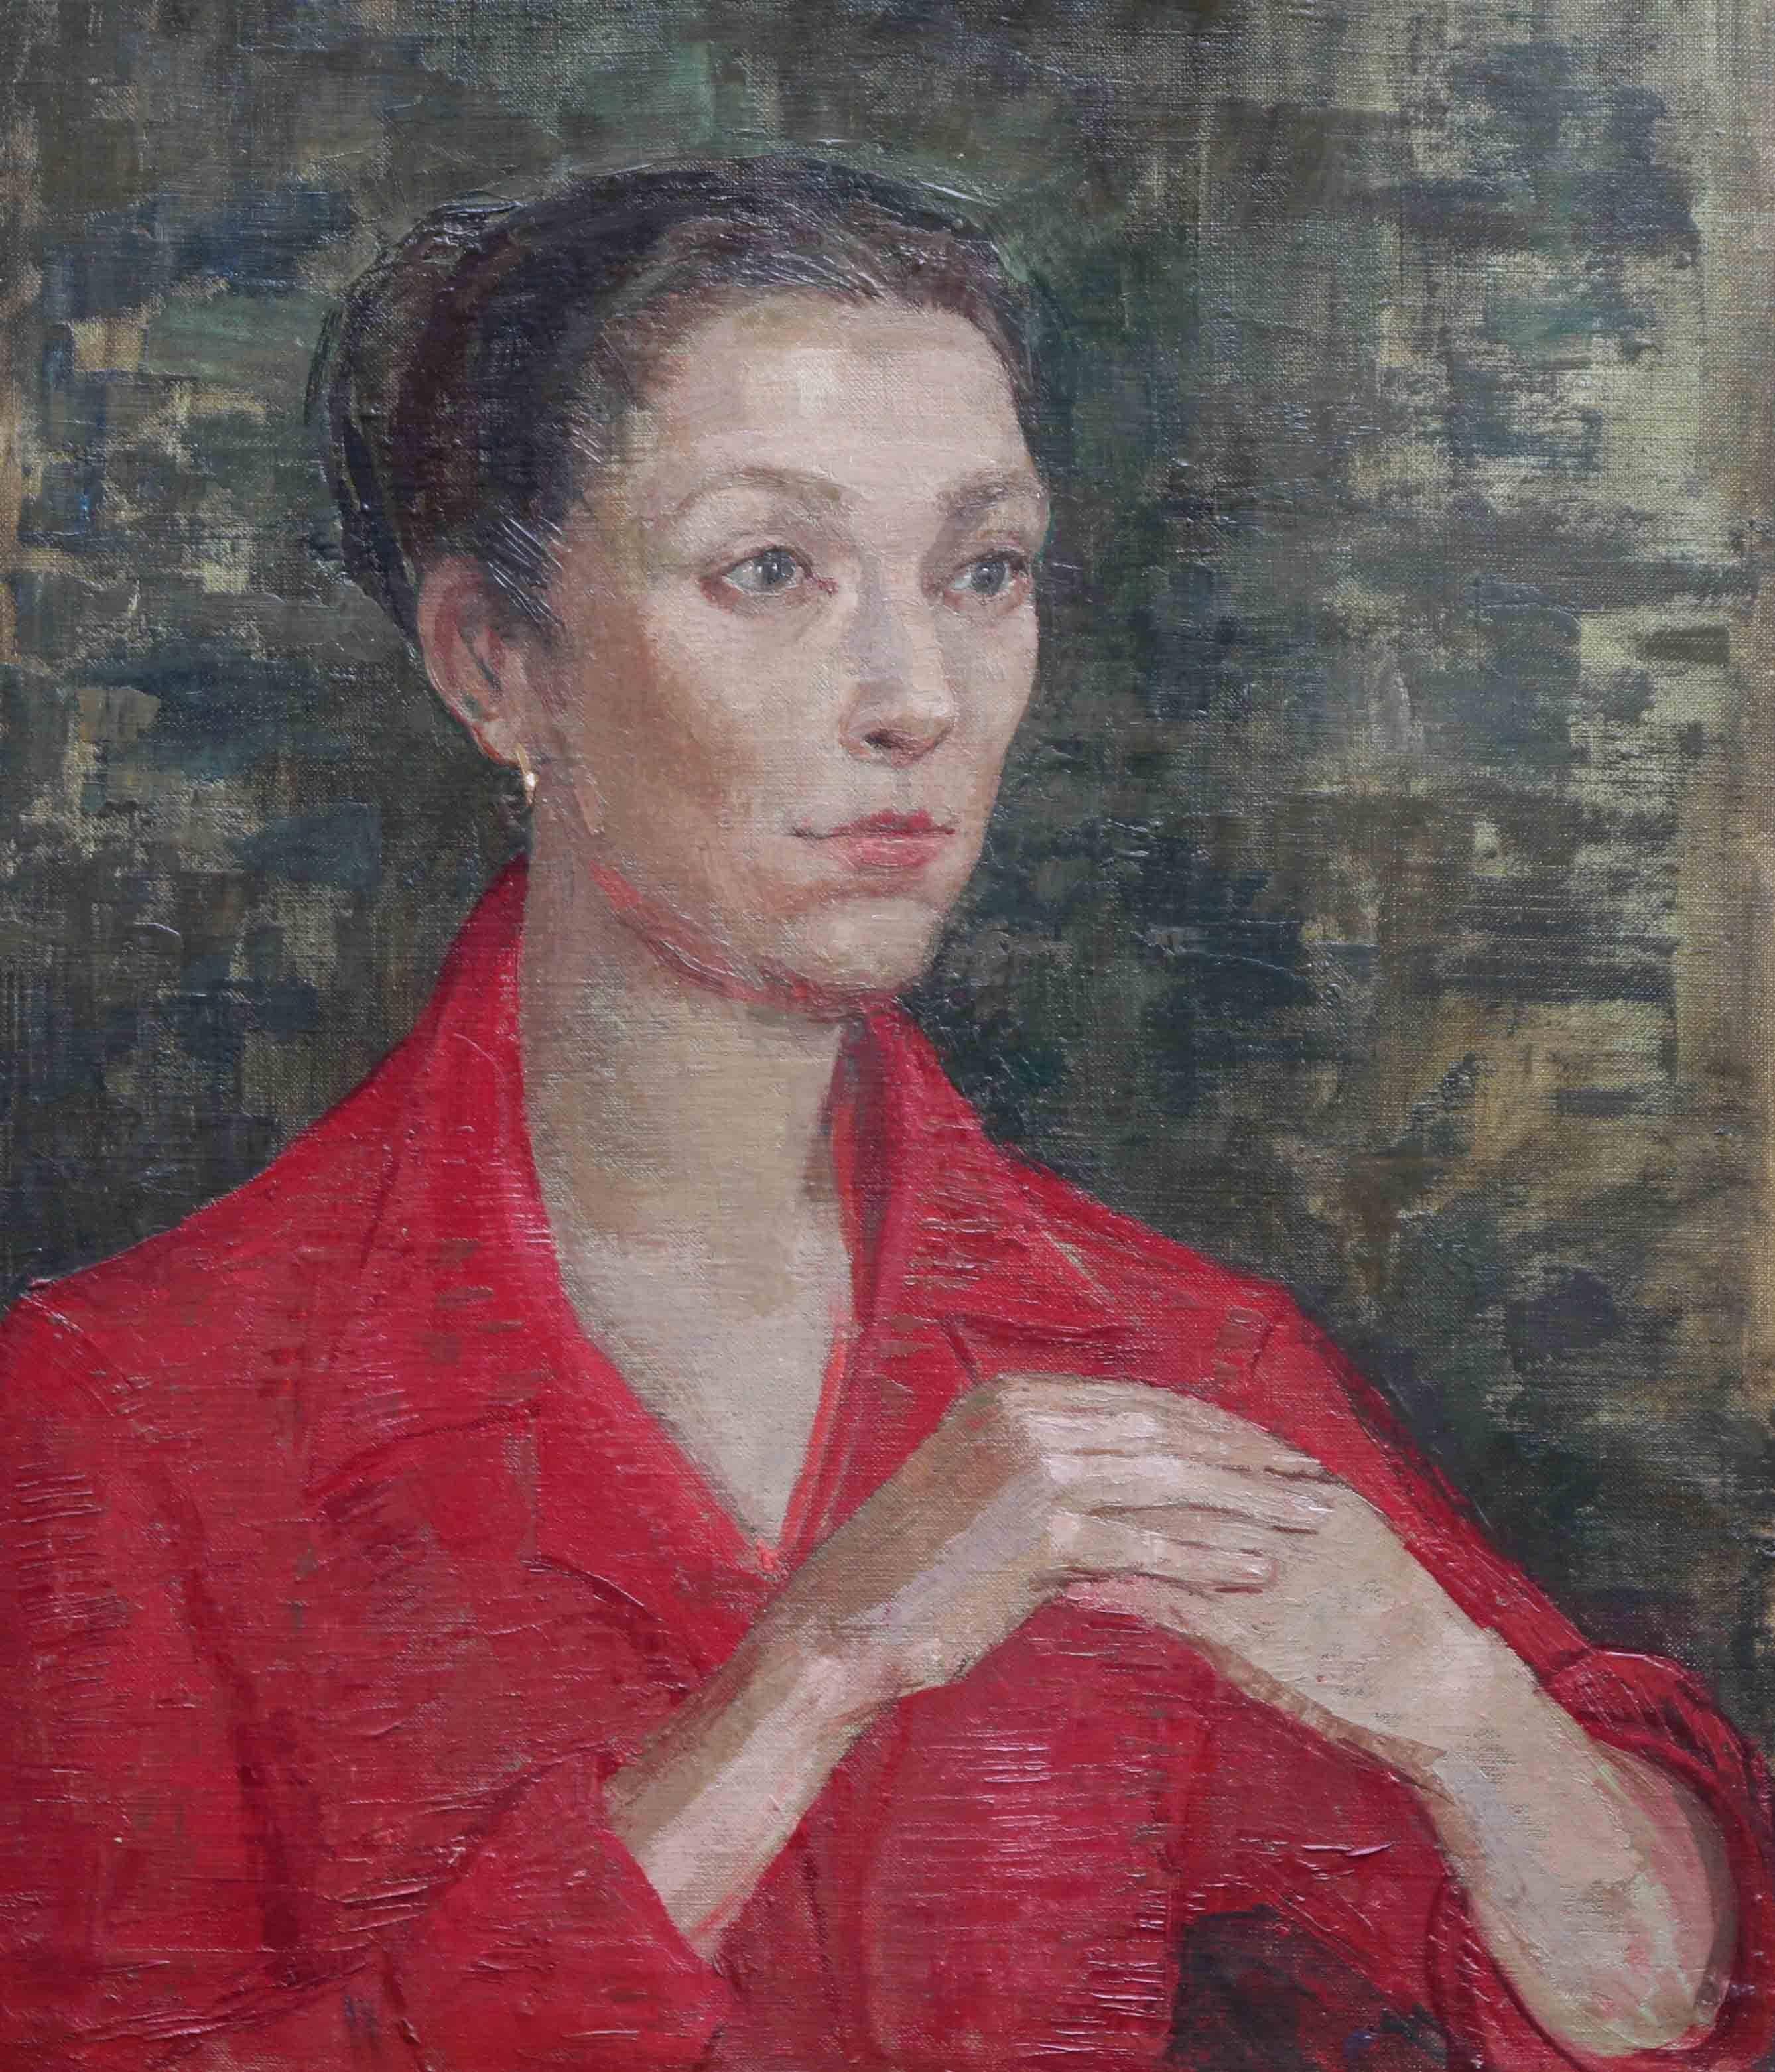 Lady in Red Portrait - British Post Impressionist 50s oil painting female artist - Painting by Constance Anne Parker